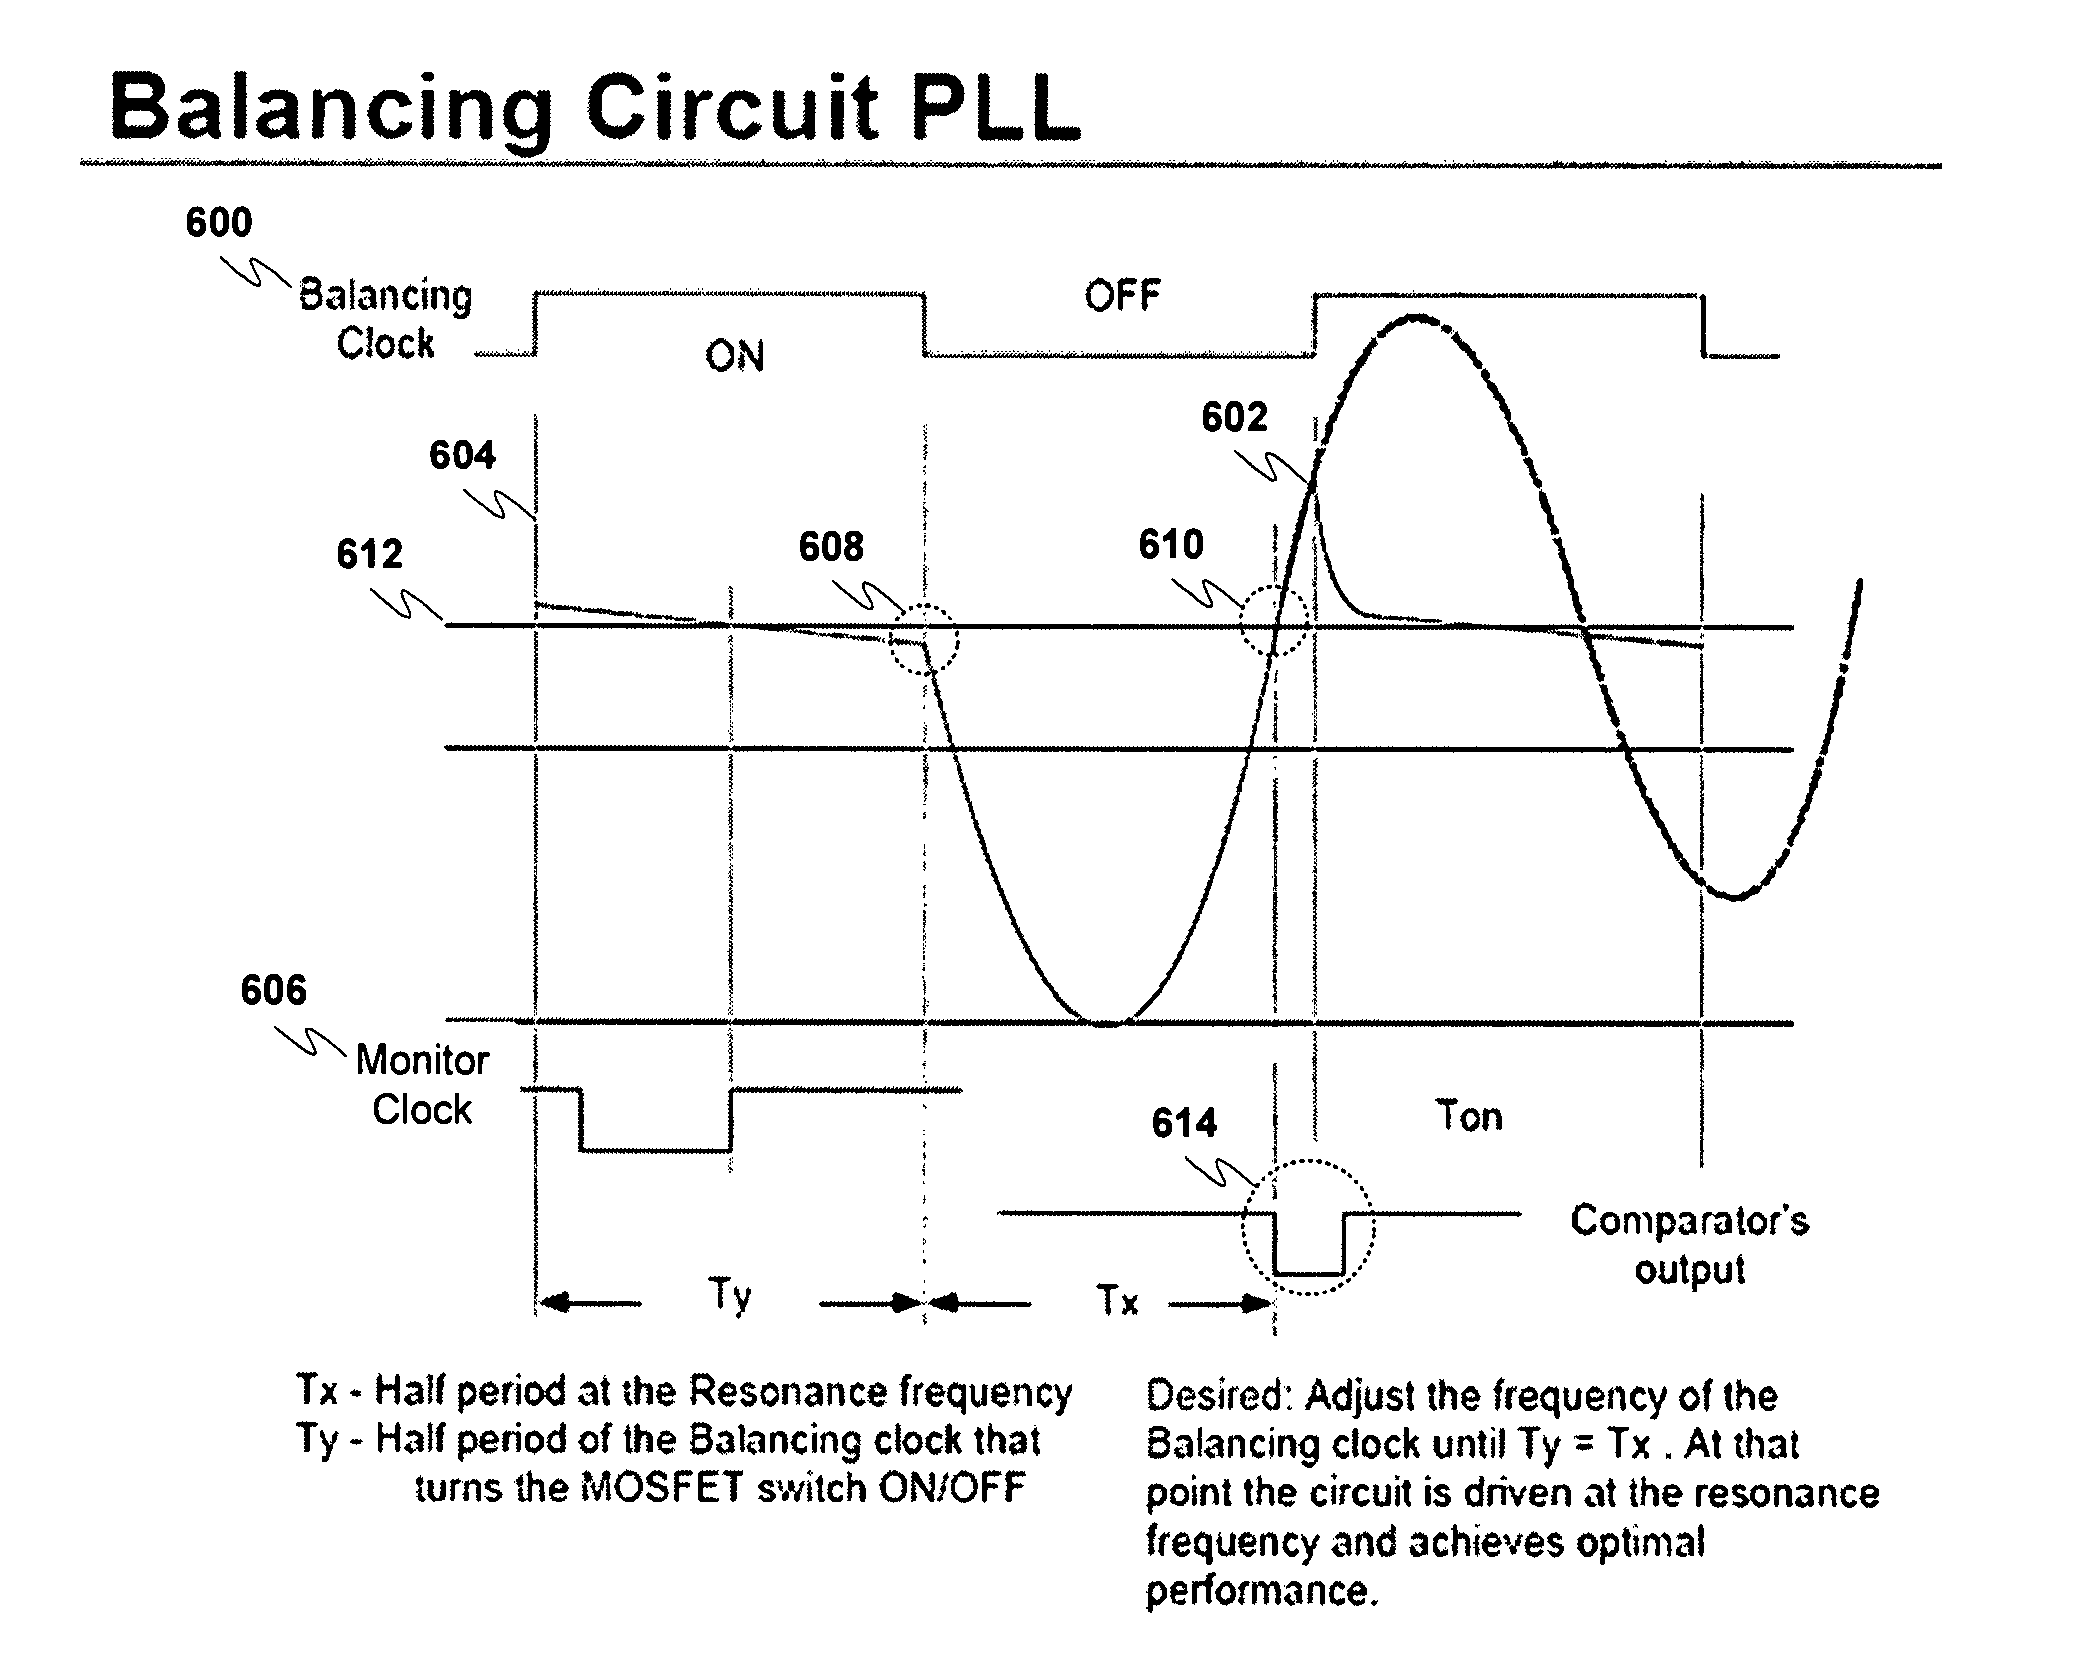 Battery balancing including resonant frequency compensation